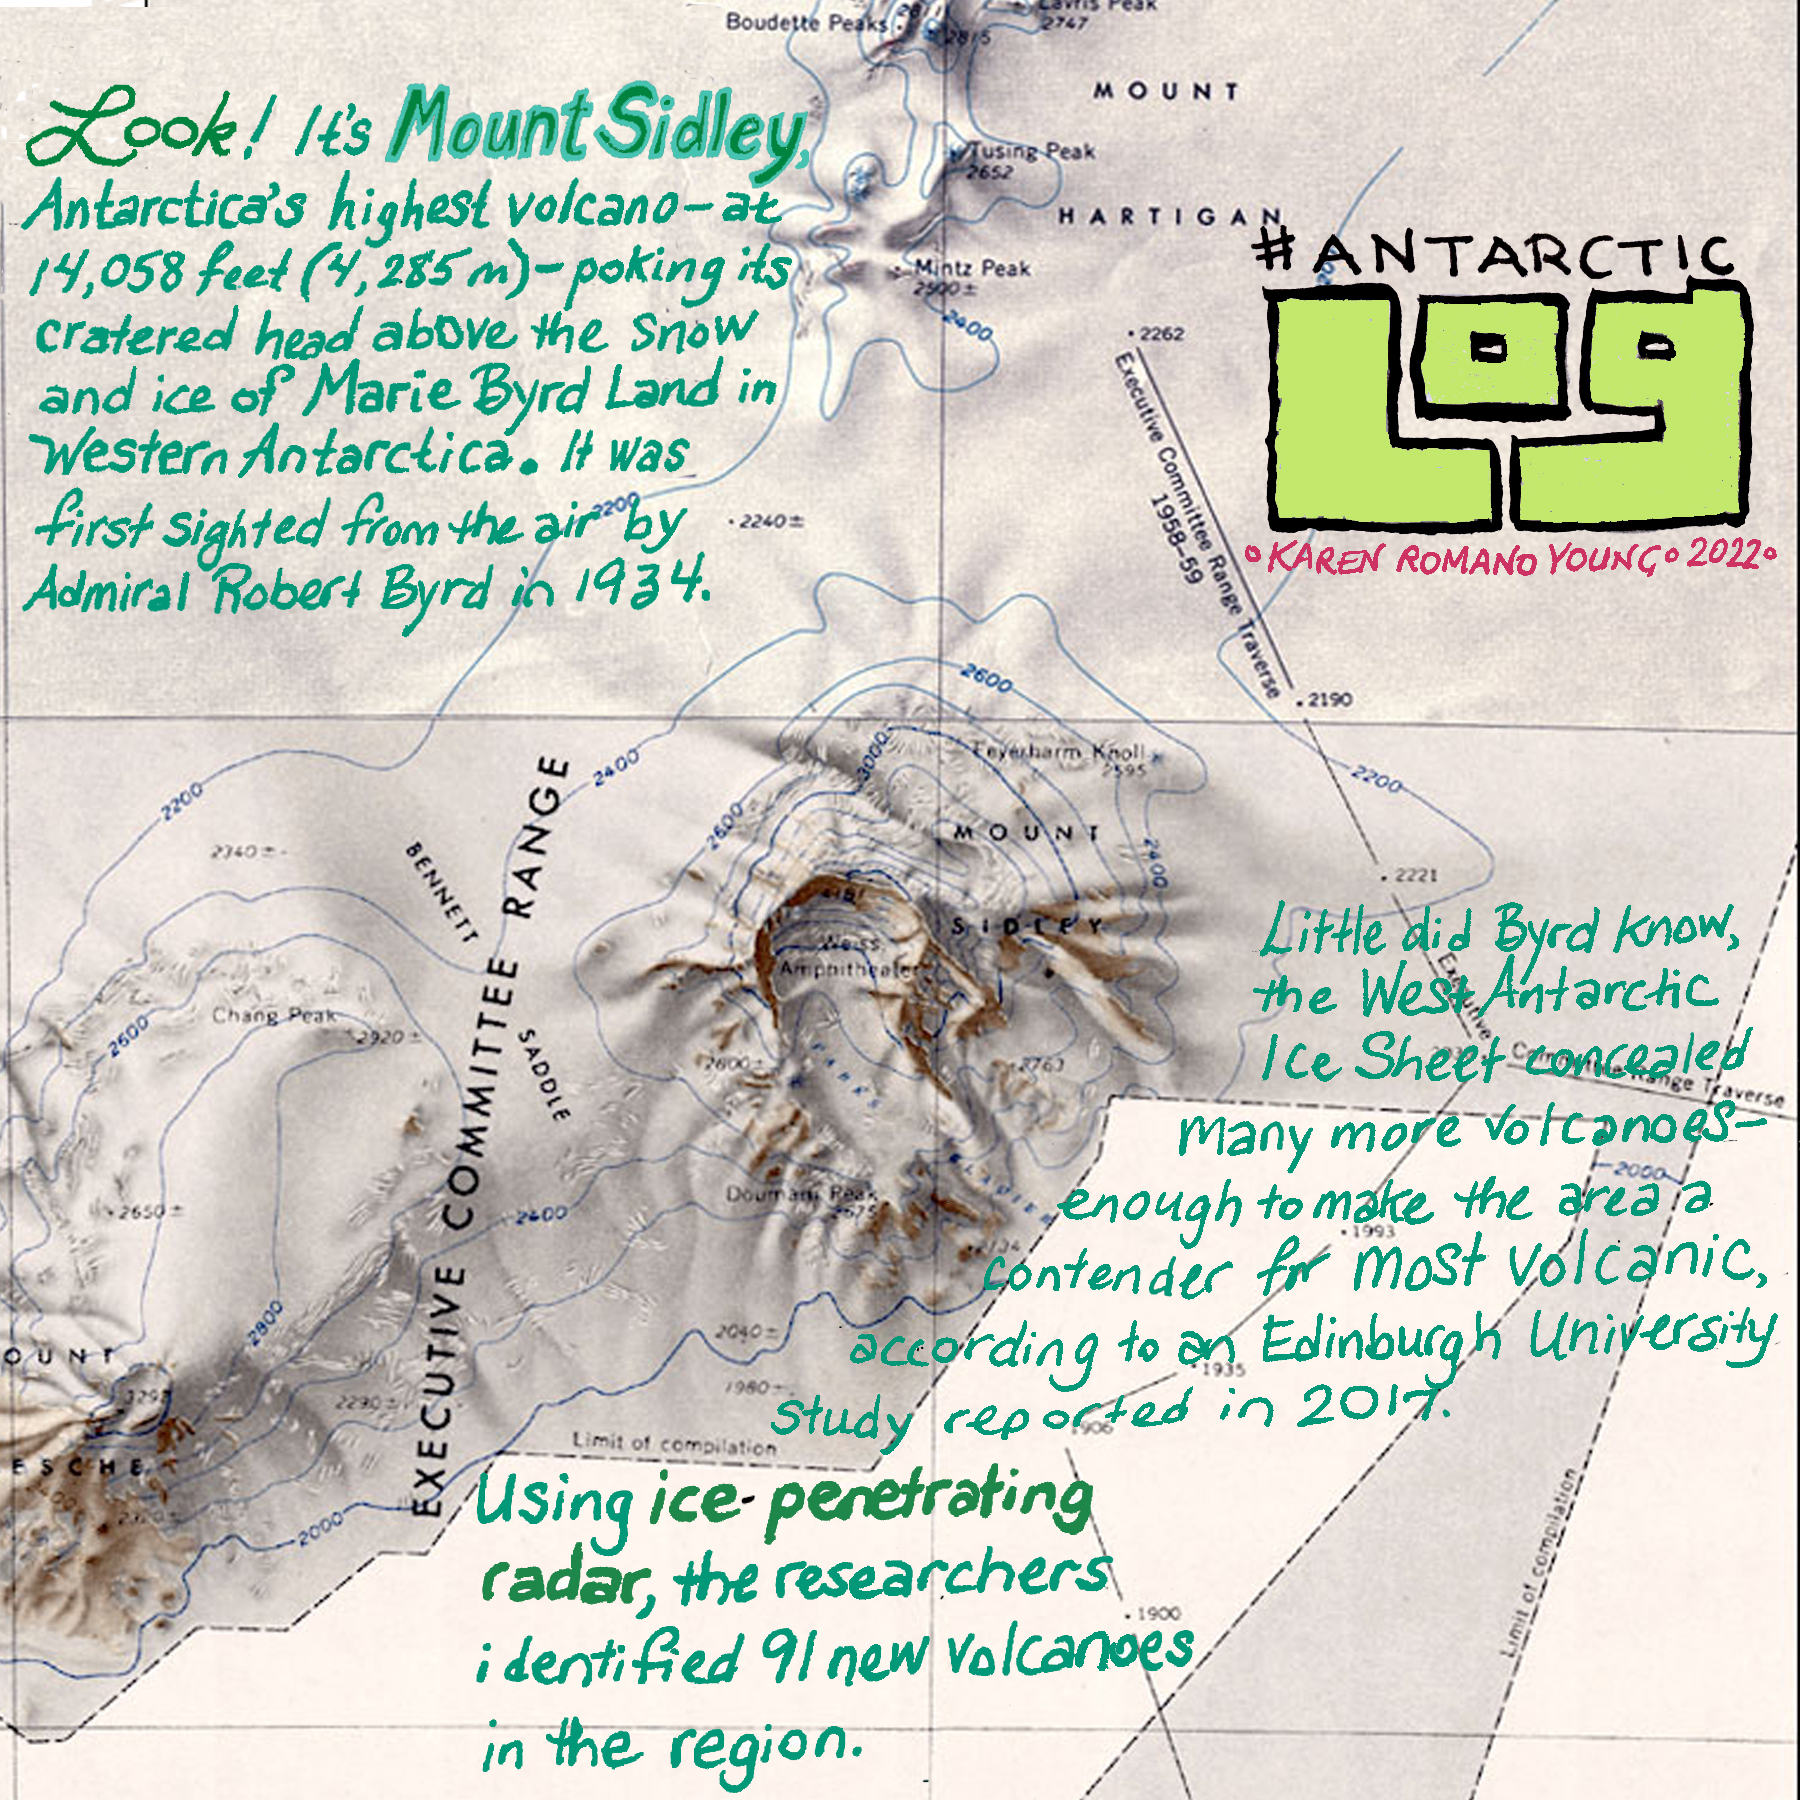 A print and drawing of a topographical map of part of Antarctica; text says, “Look, it’s Mount Sidley, Antarctica’s highest volcano…first sighted by Admiral Robert Byrd in 1934.” The text also explains that years later using ice-penetrating radar, researchers determined there were 91 volcanoes in that area.